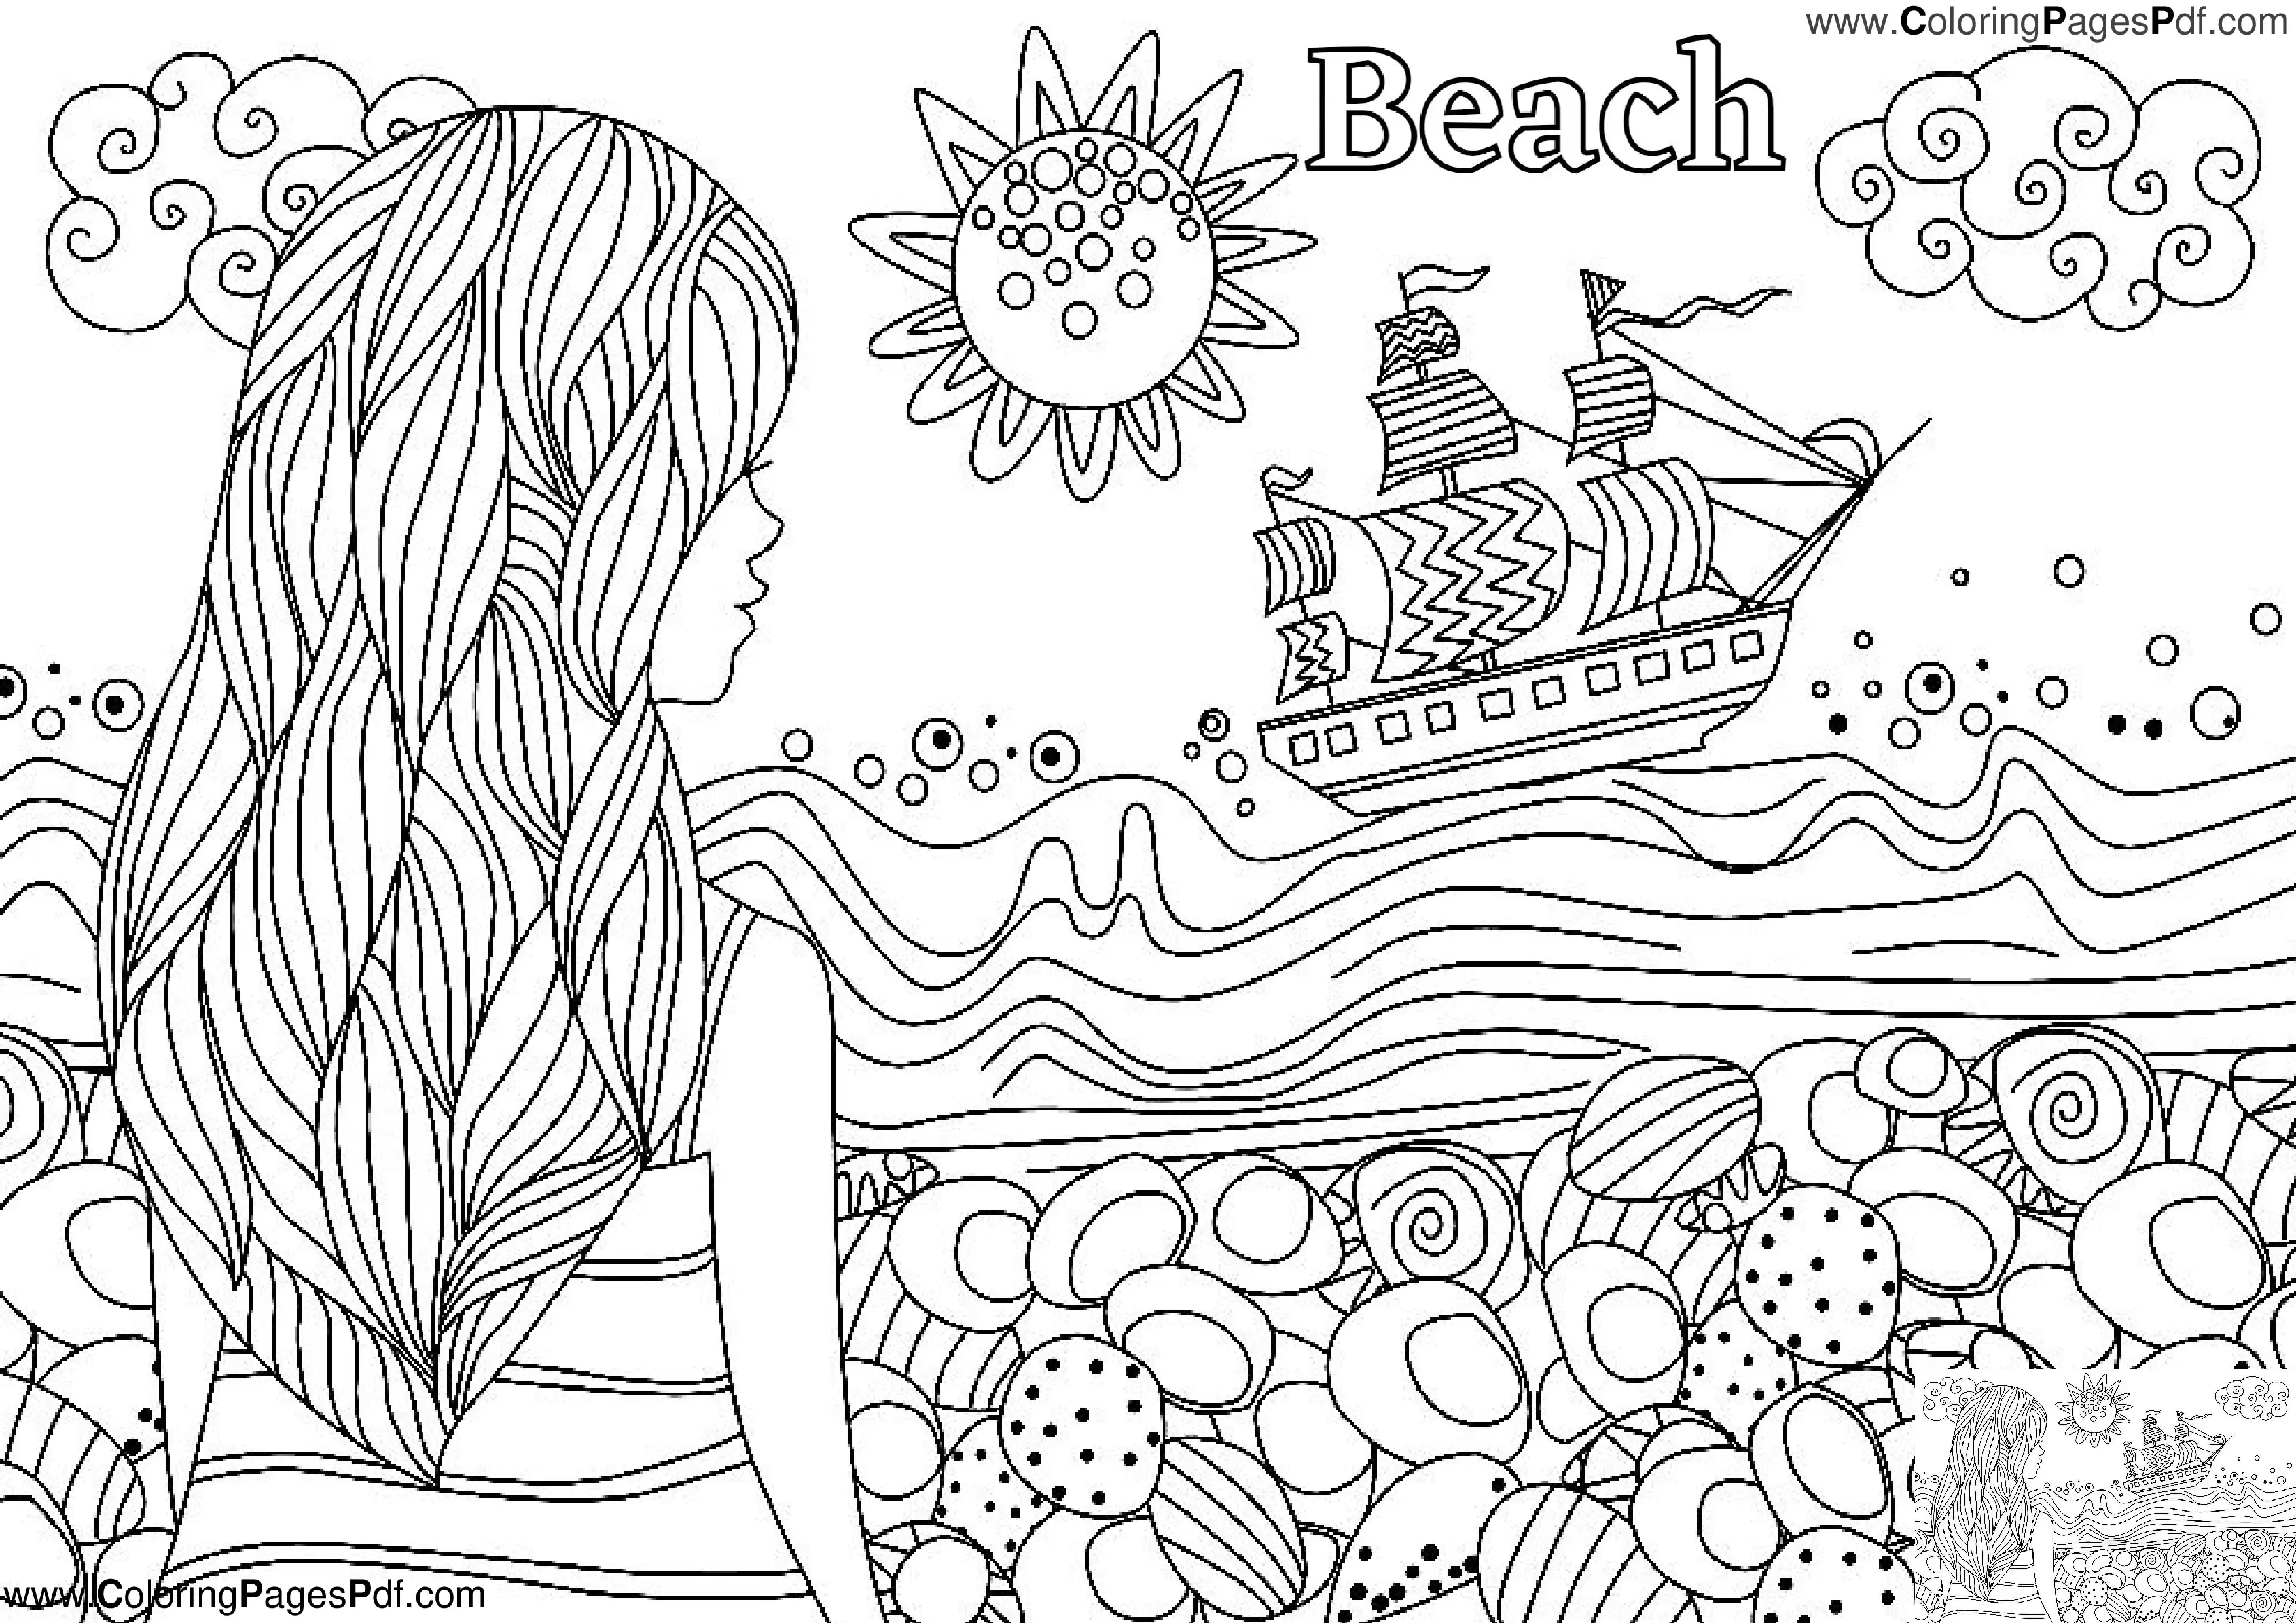 Beach coloring pages for adults